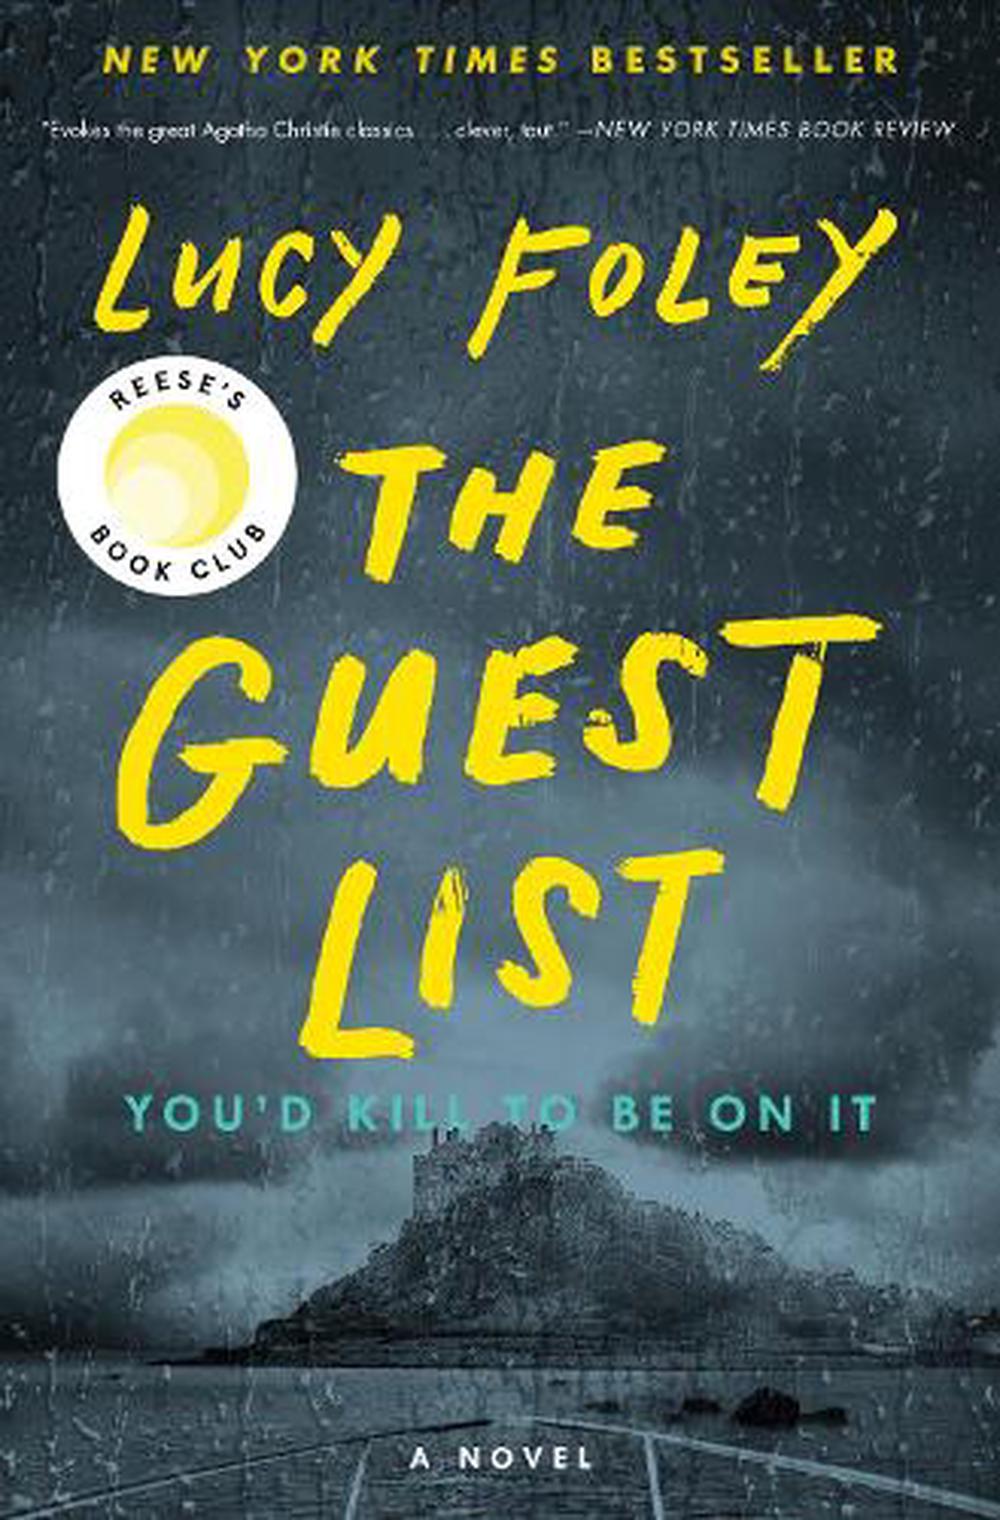 book review the guest list